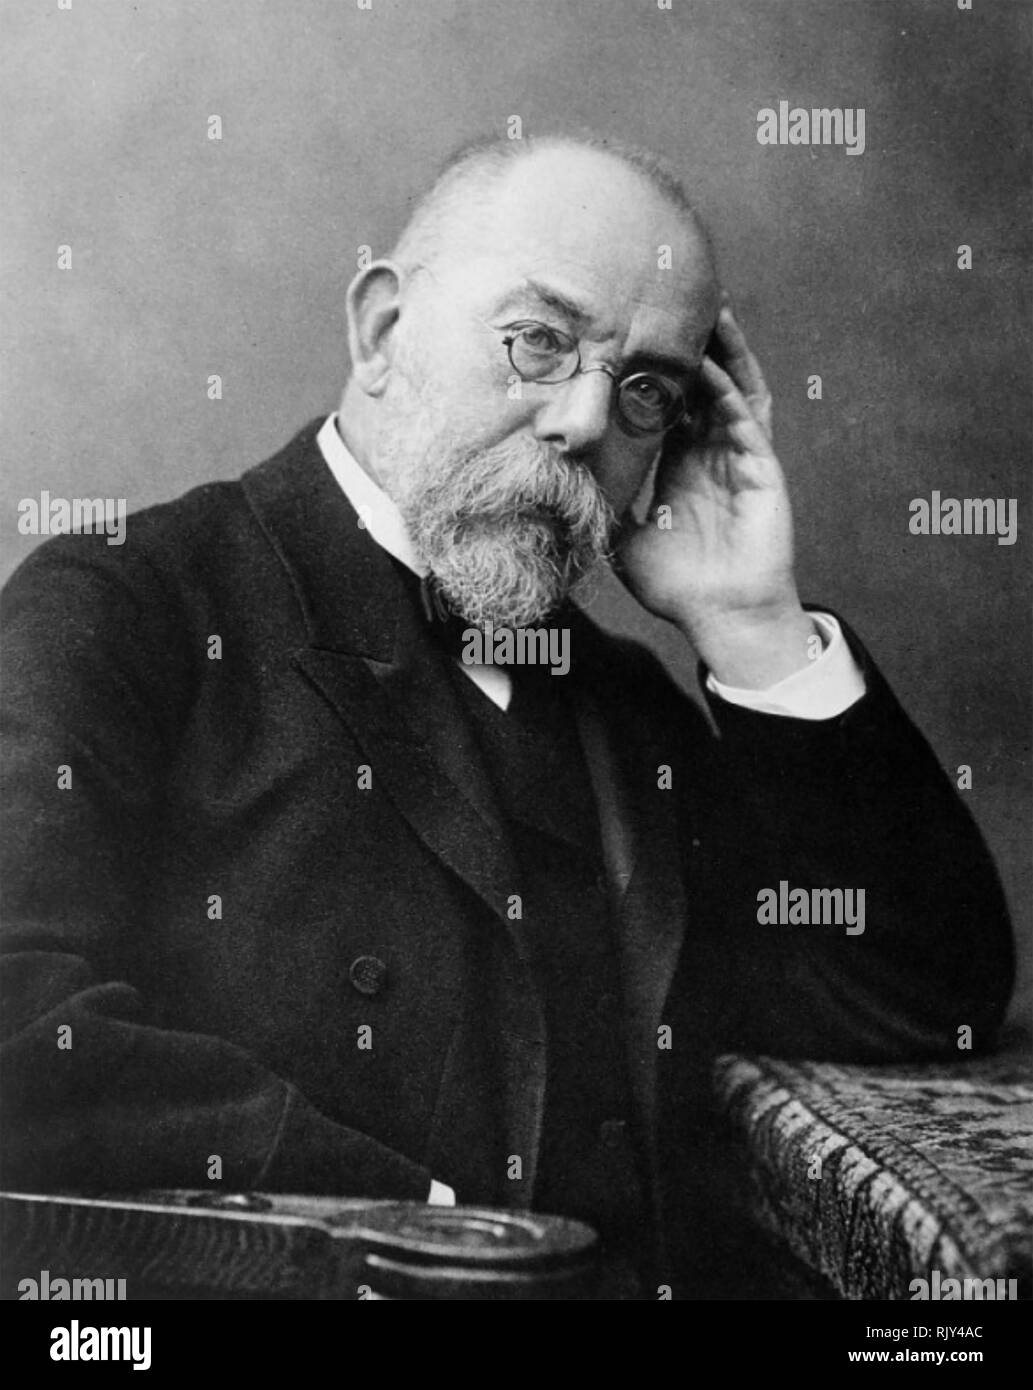 ROBERT KOCH (1843-1910) German physician and microbiologist about 1907 Stock Photo